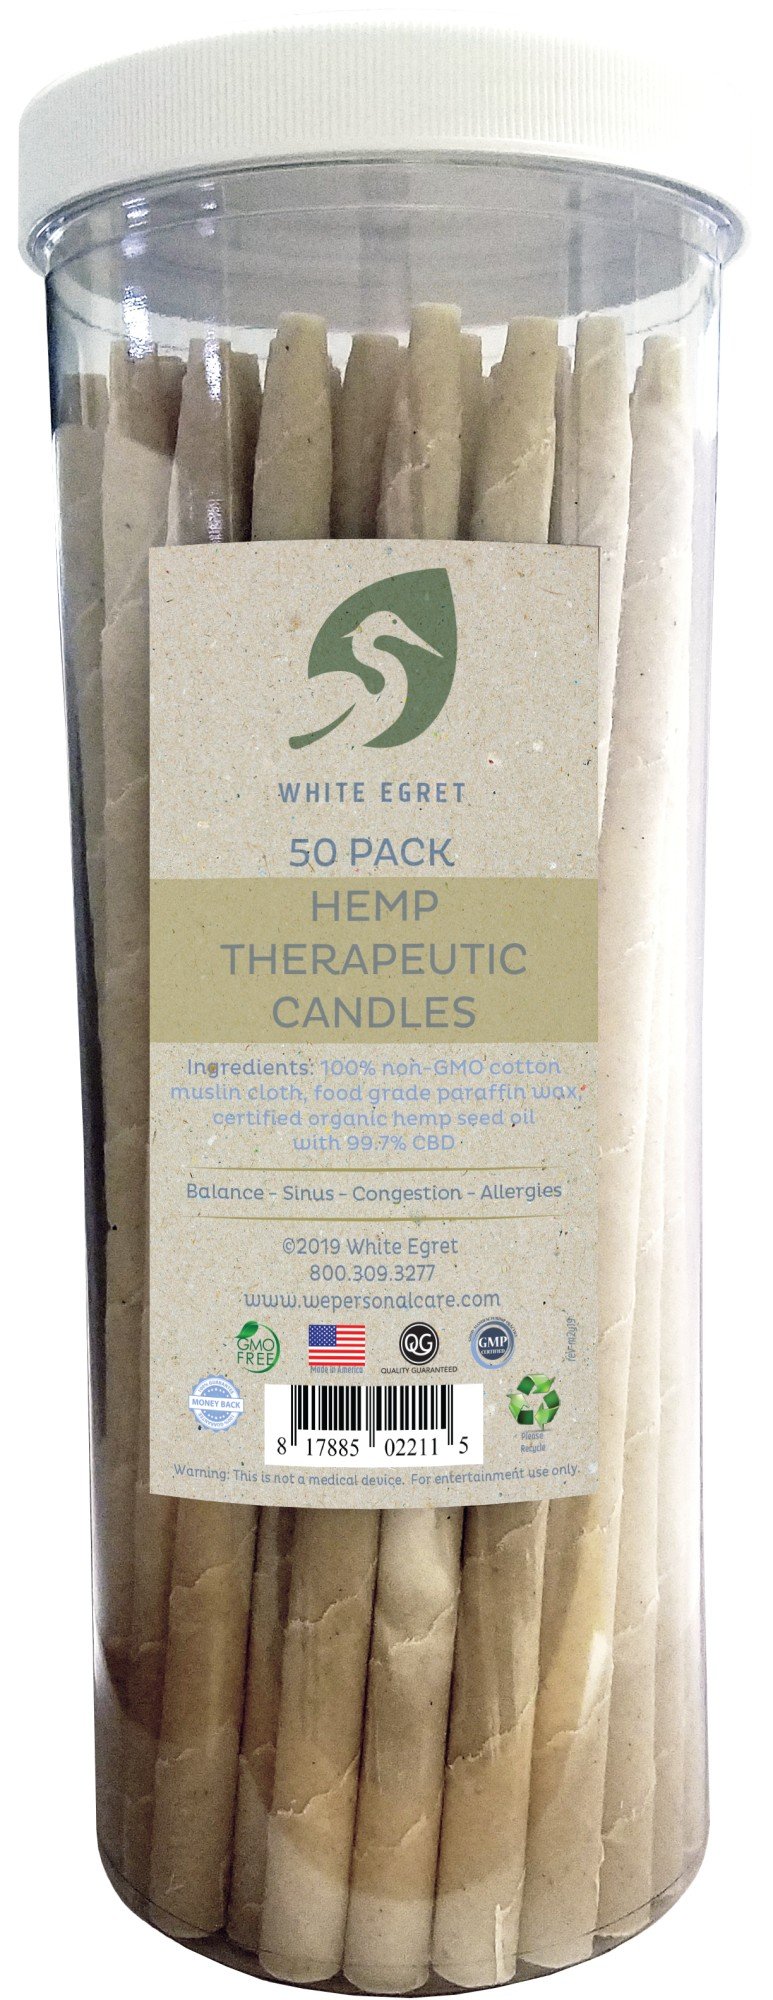 White Egret INC Hemp Paraffin Container with 50 1/2 Inch 50 Pack